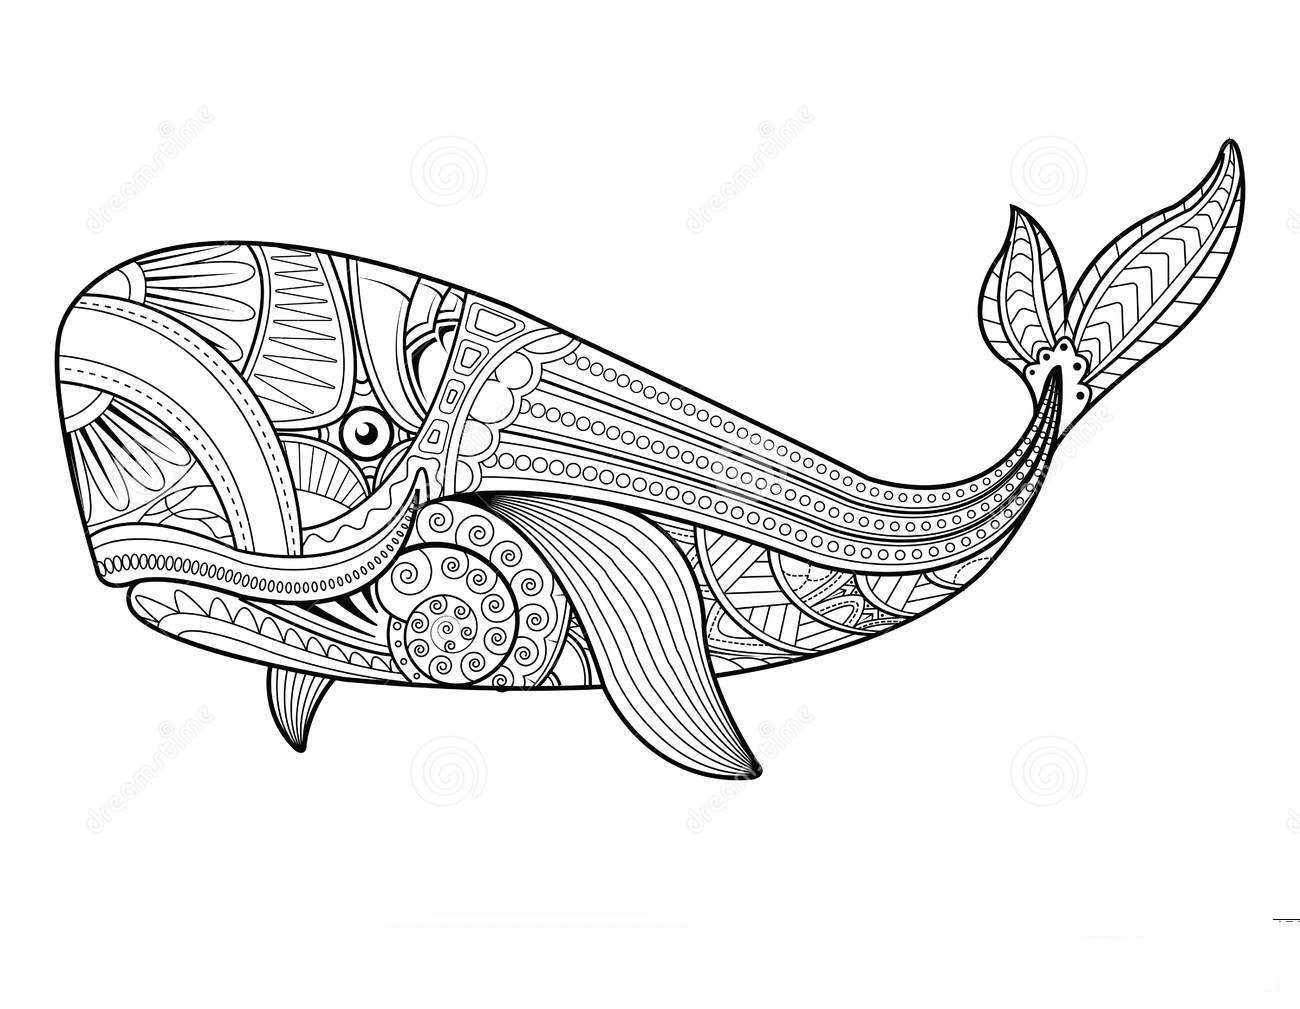 Mandala Whale Coloring Page   Free Printable Coloring Pages for Kids